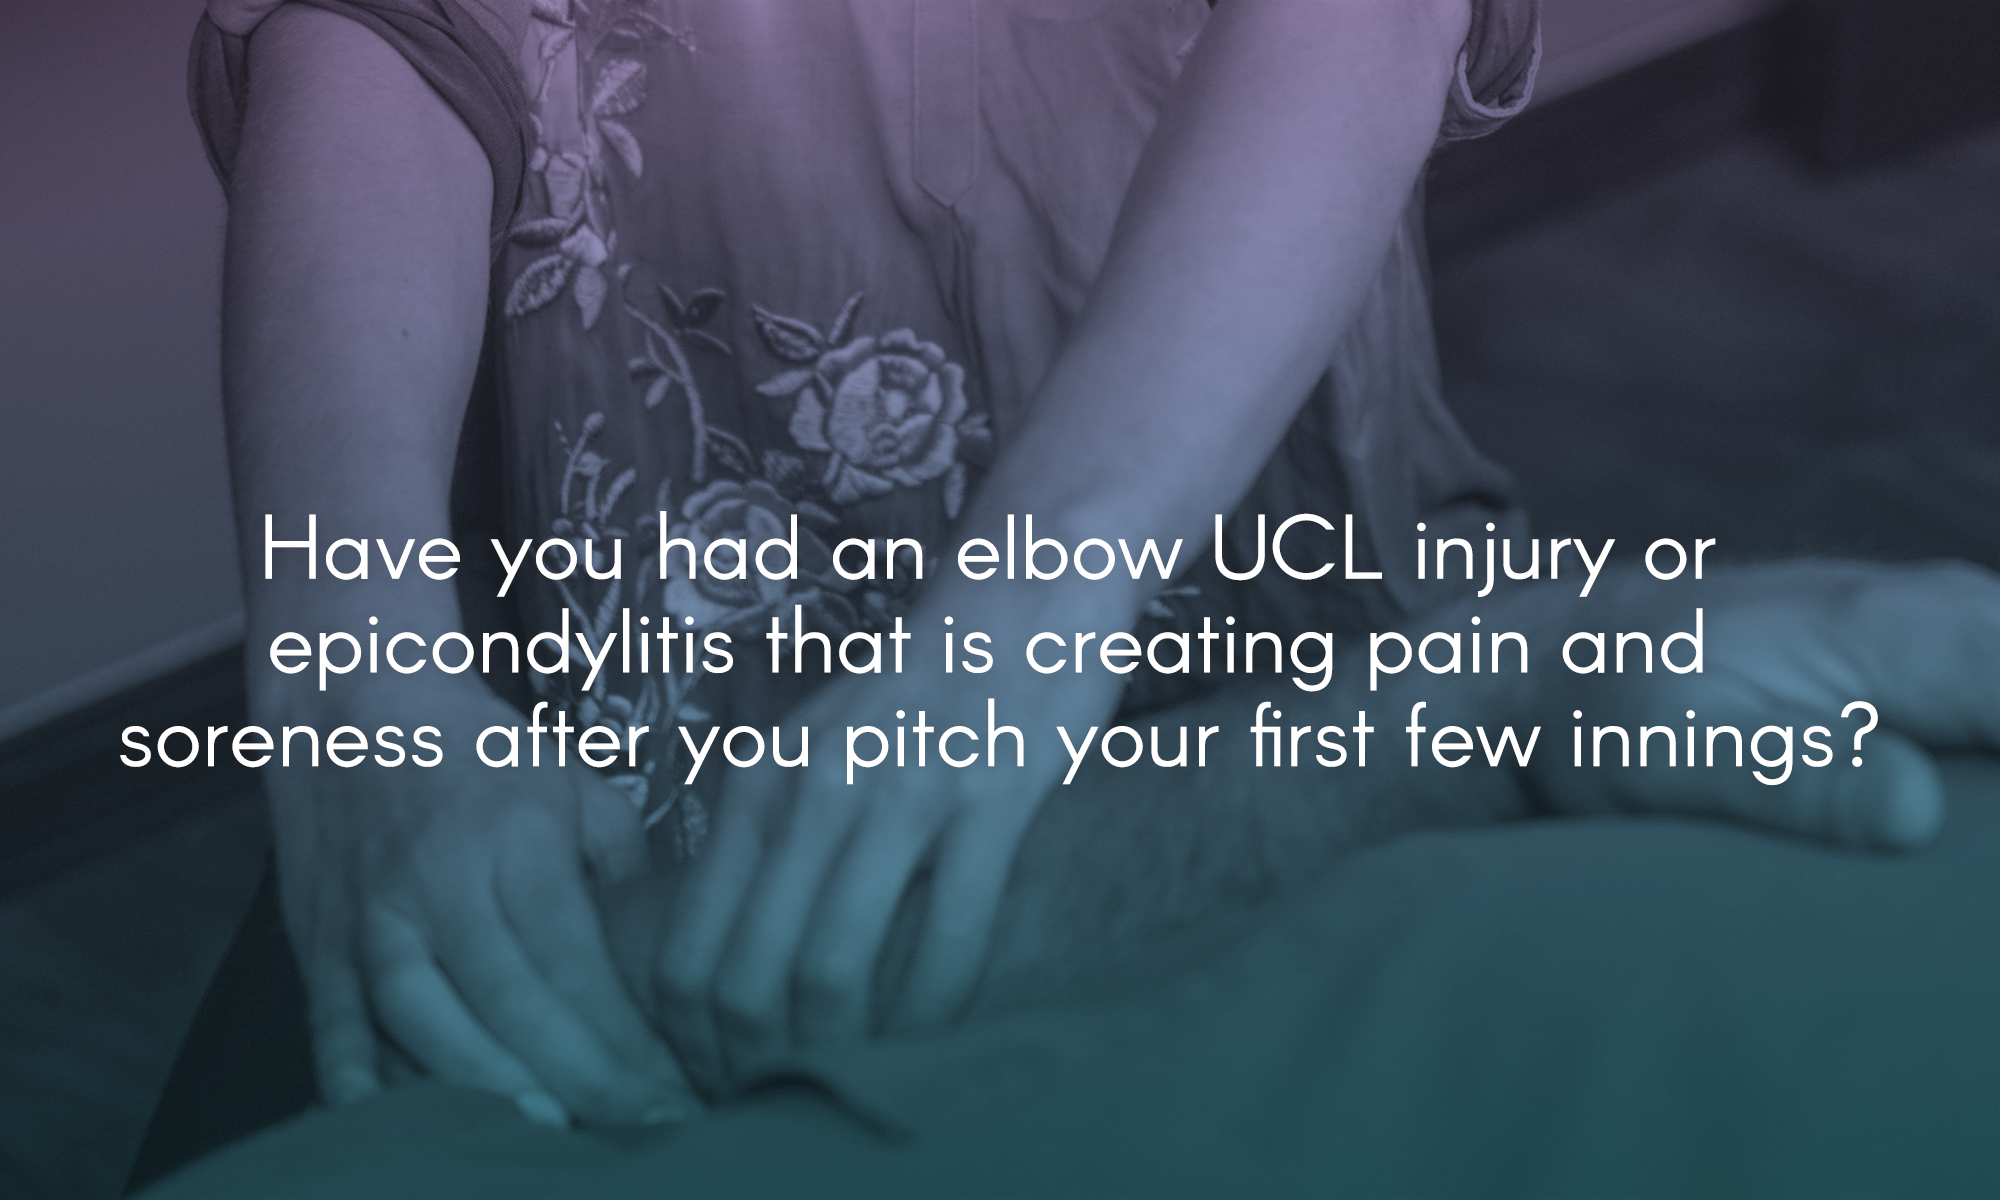  Have you had an elbow UCL injury or epicondylitis that is creating pain and soreness after you pitch your first few innings? 